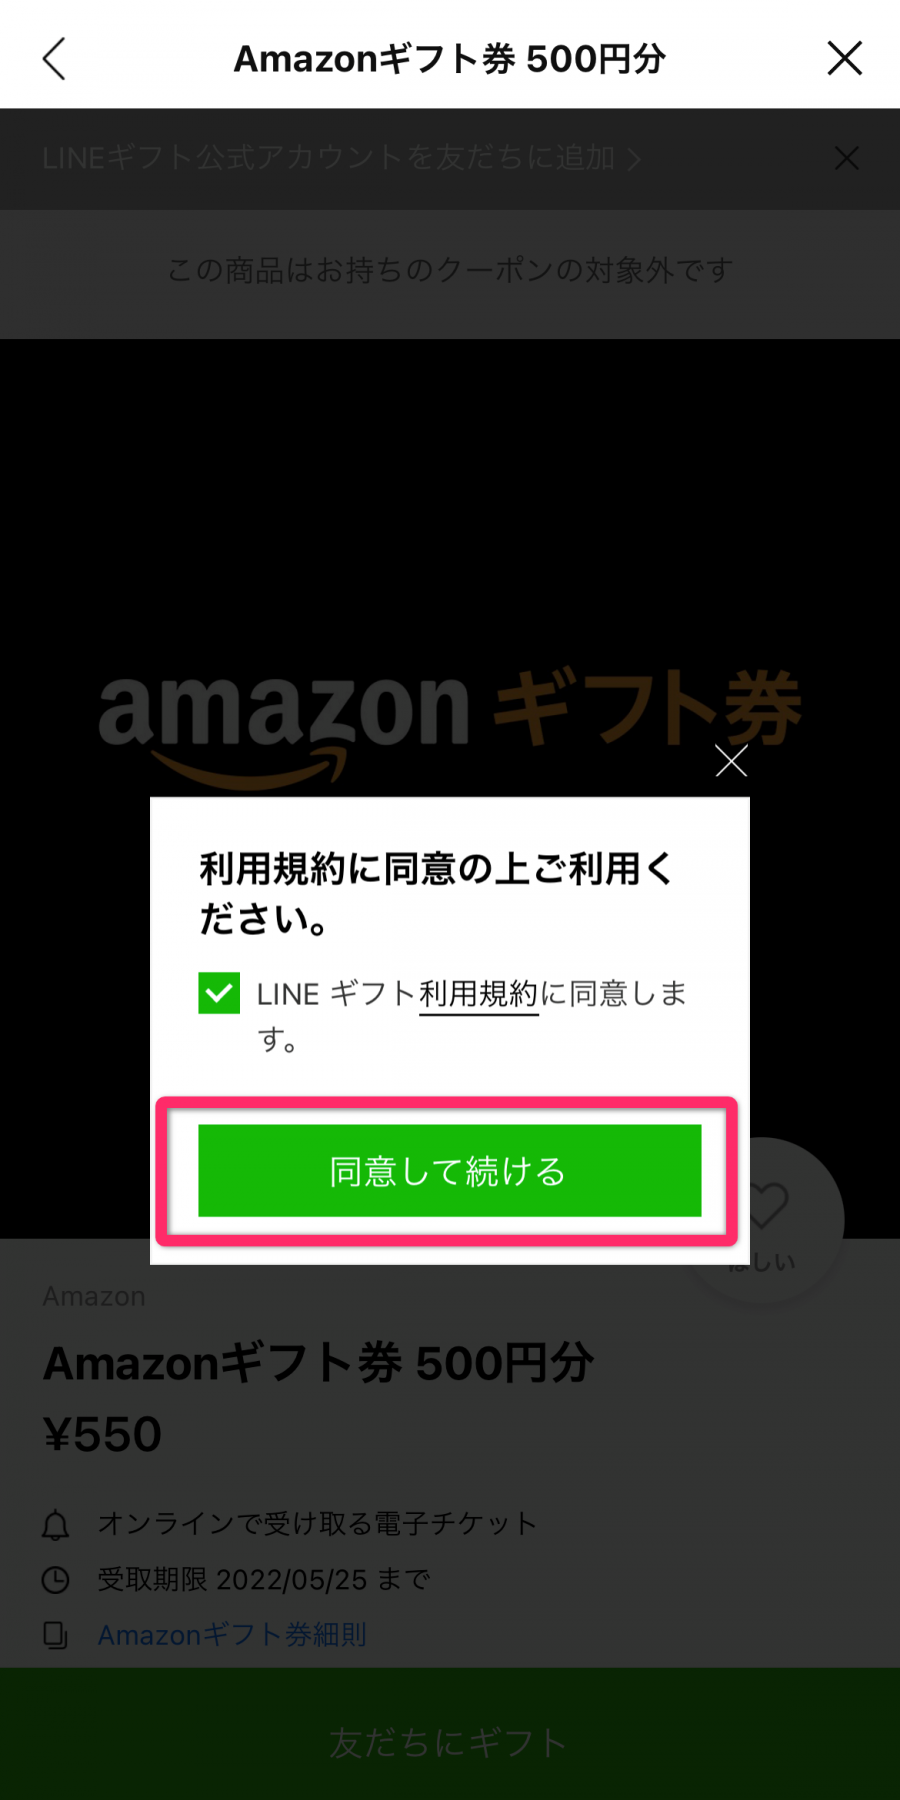 LINEギフト 利用規約